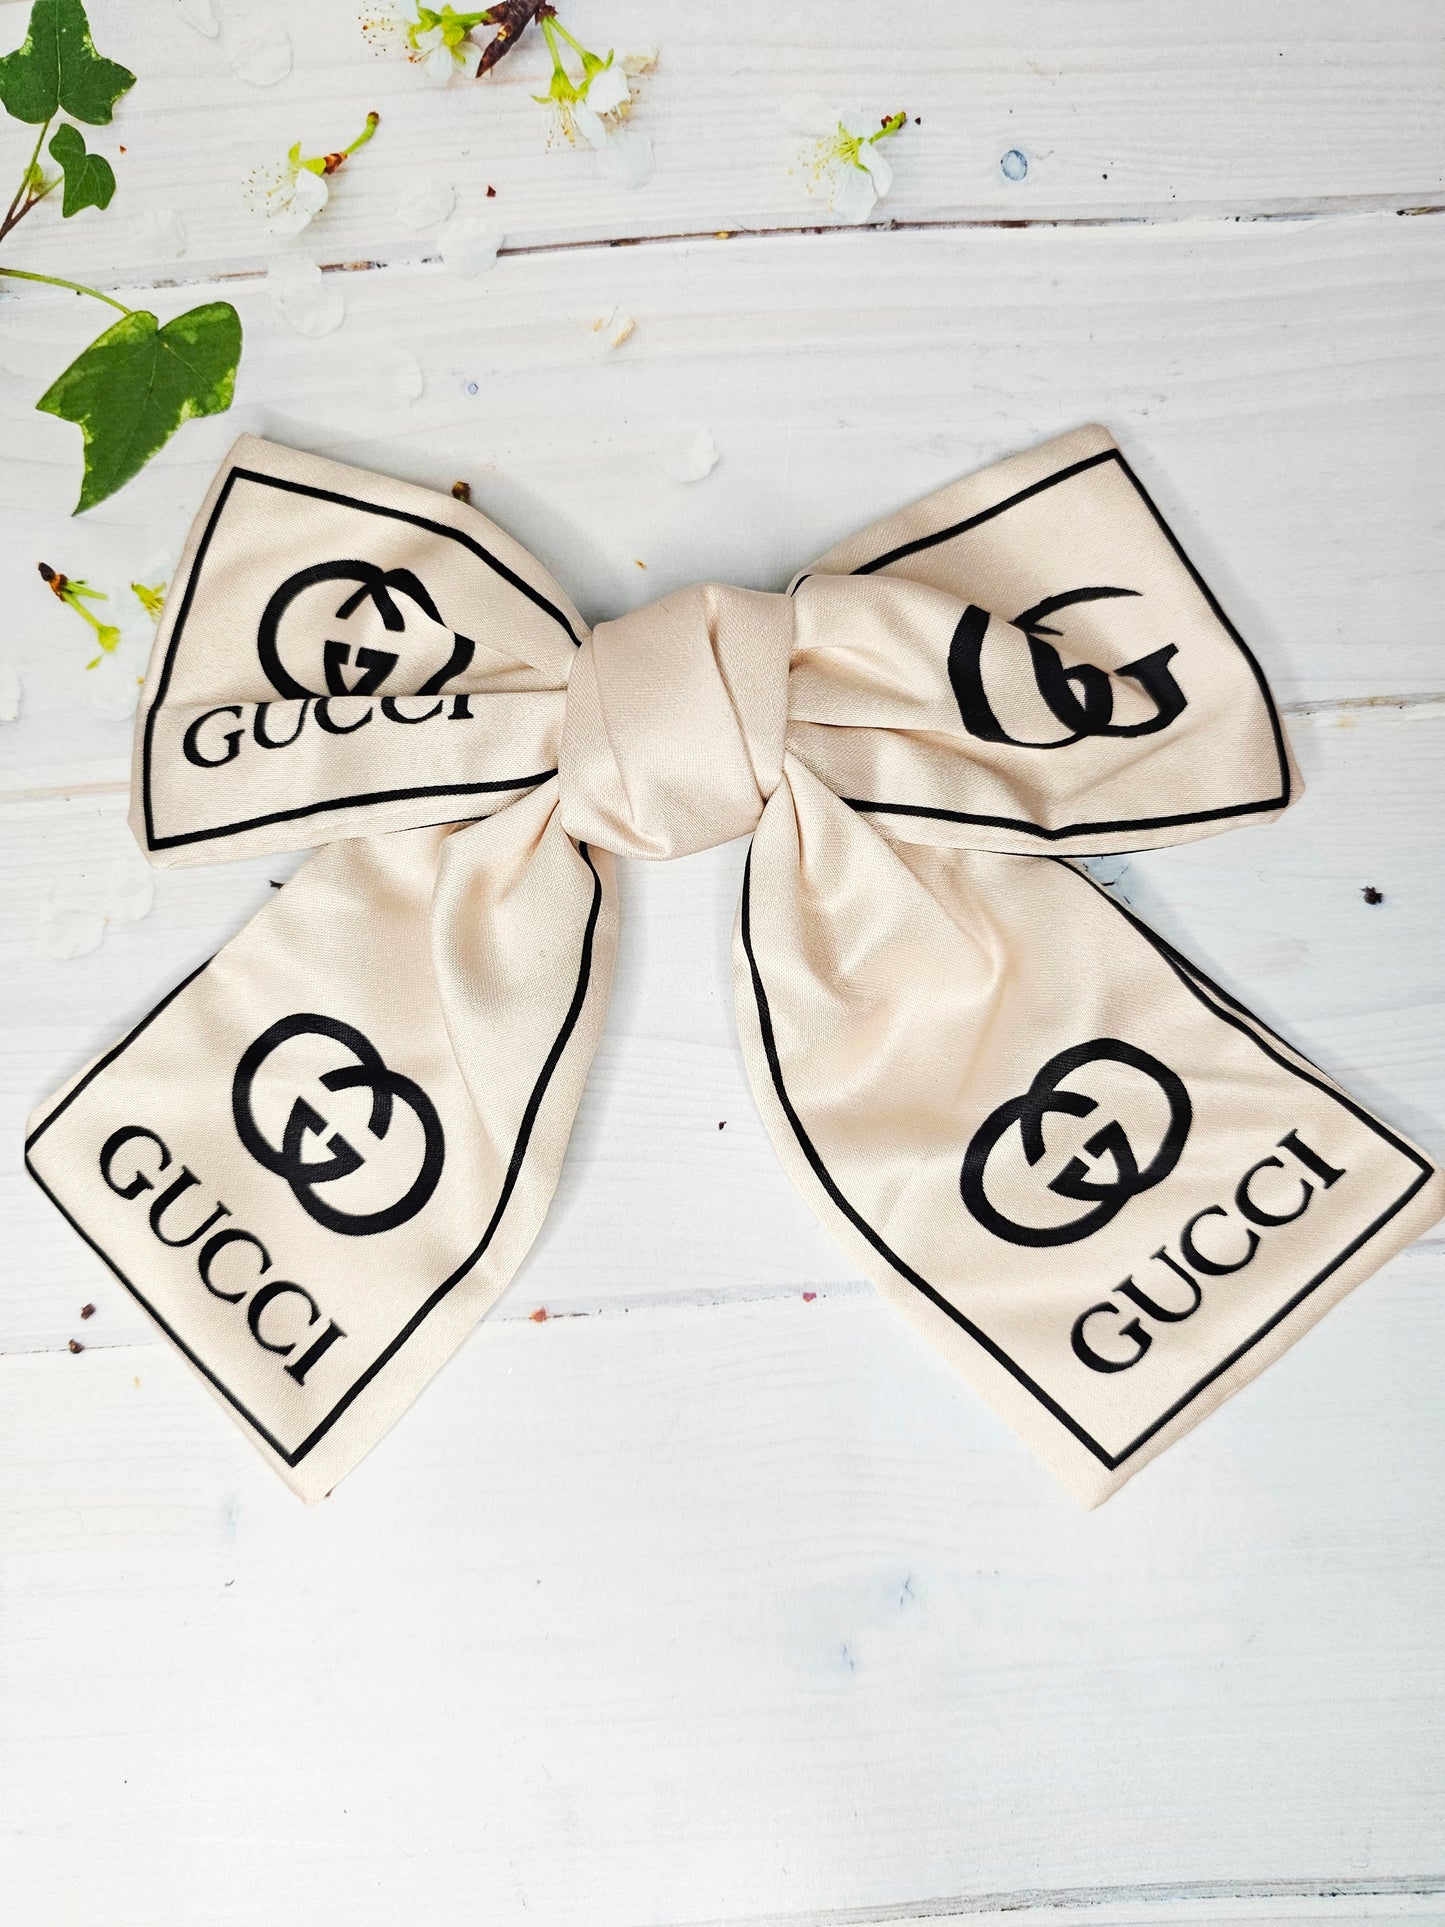 XL draping designer croc bows, come in pairs!